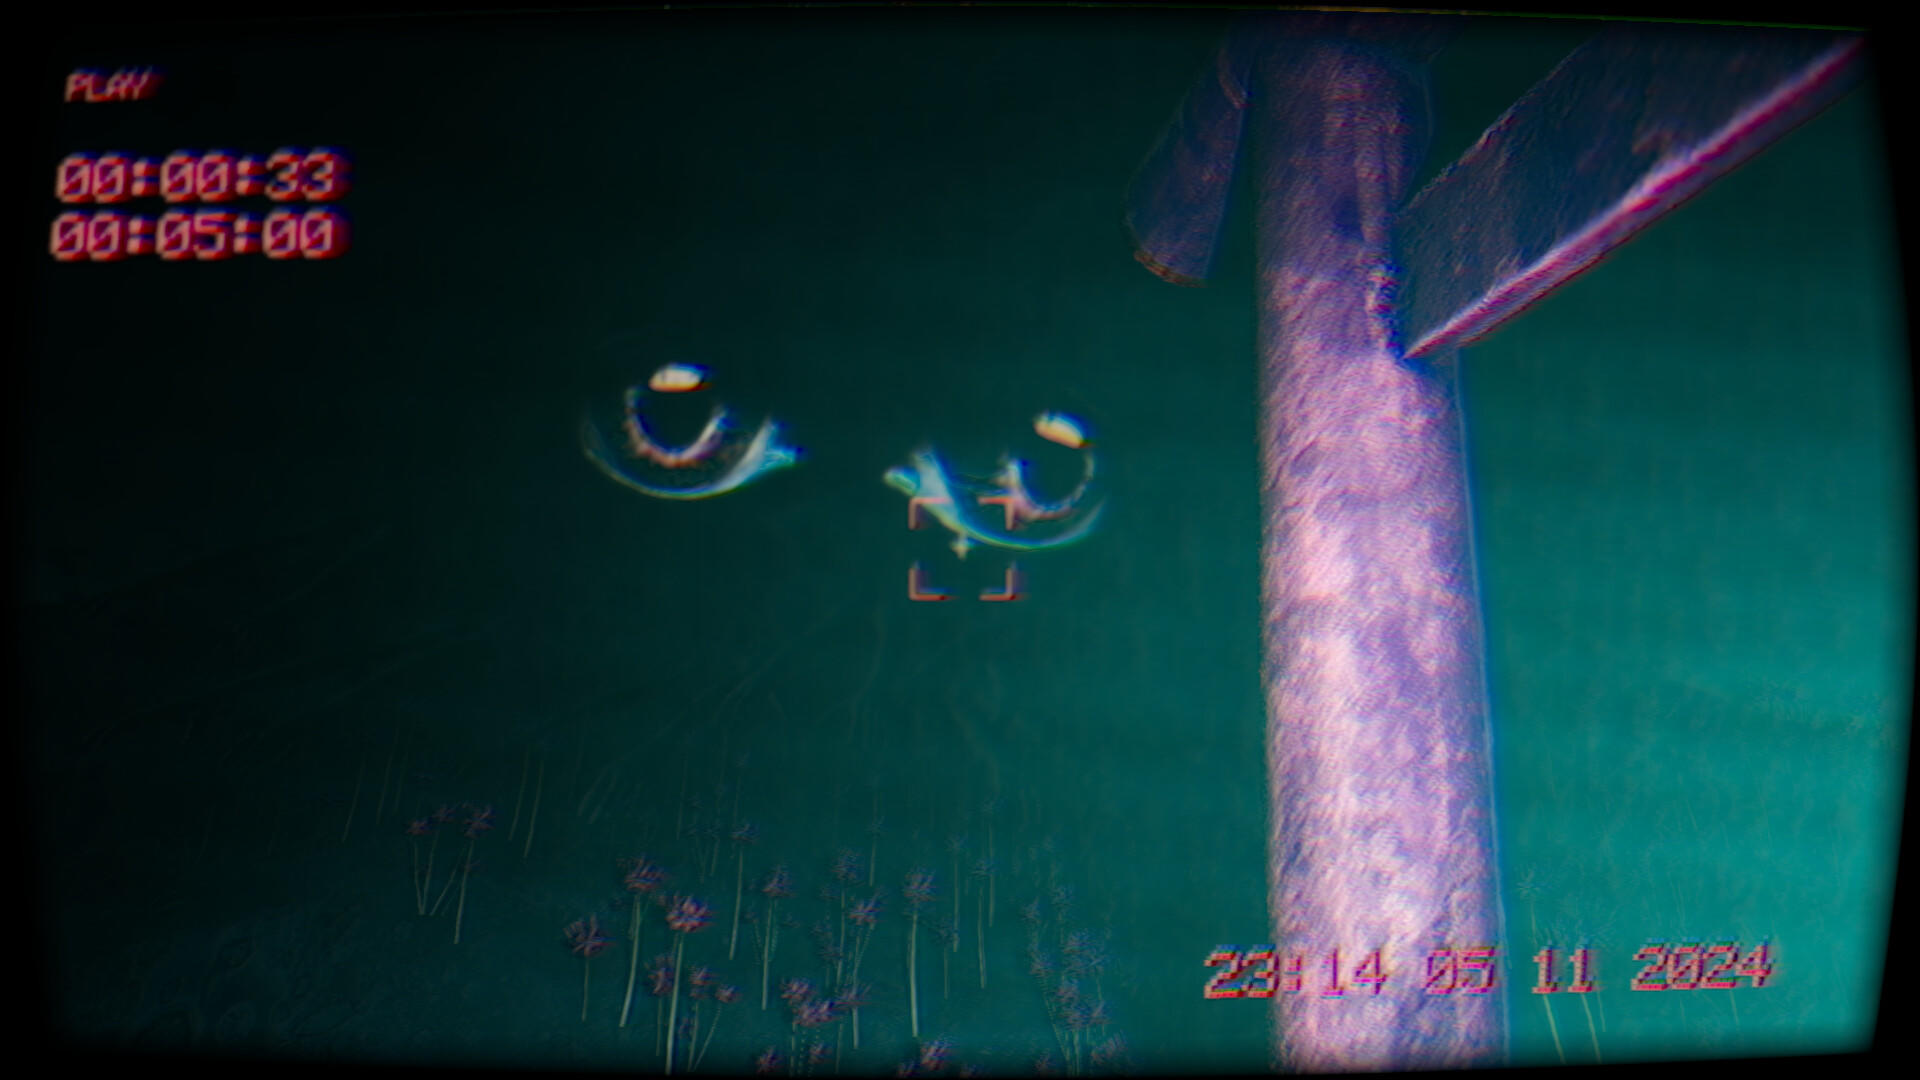 Screenshot 1 of In the footage 